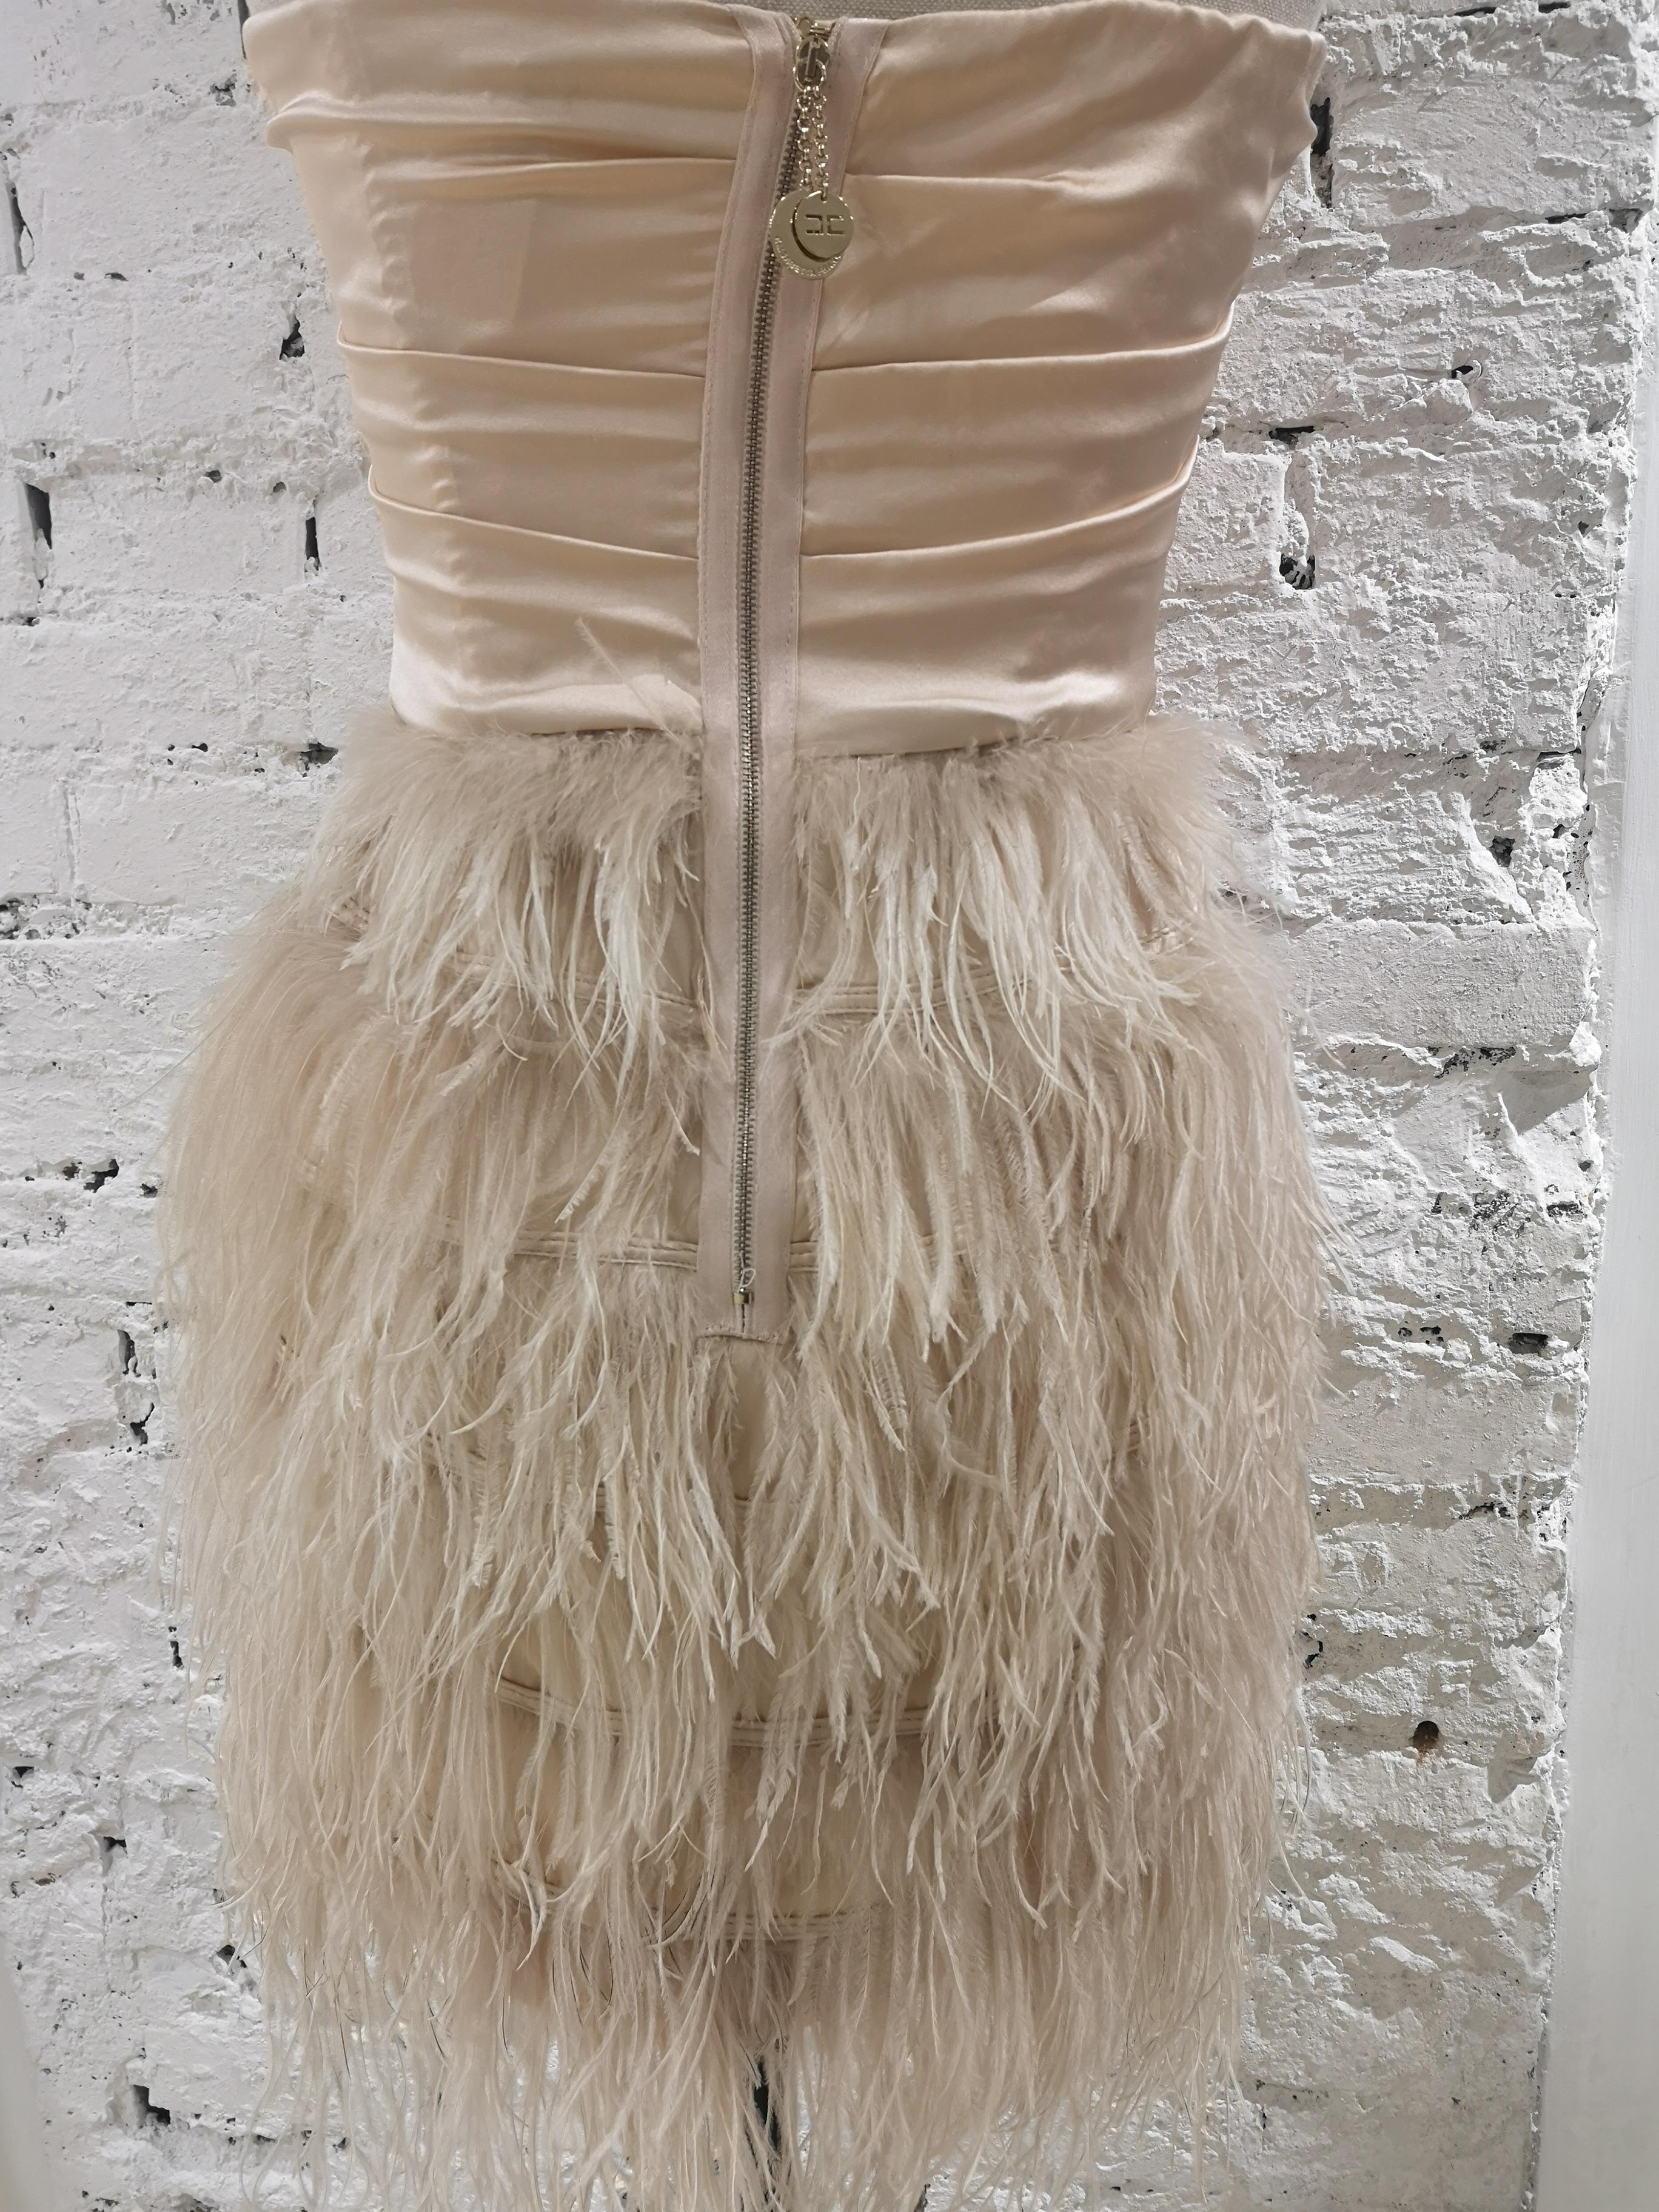 Elisabetta Franchi peach feathers dress In Excellent Condition For Sale In Capri, IT